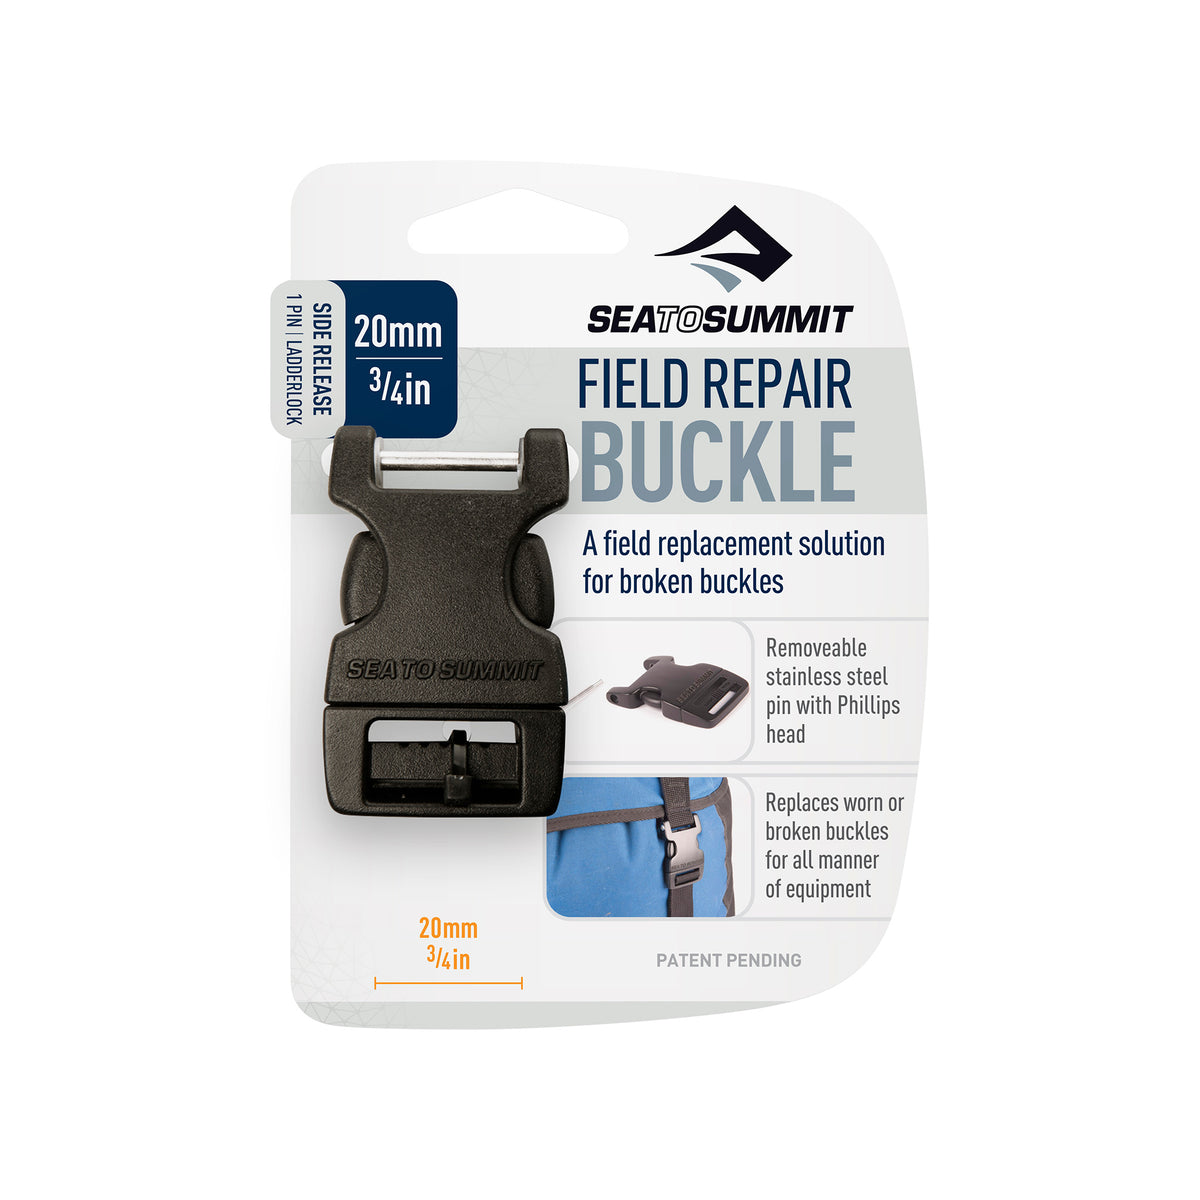 3/4 in | 20mm || Side Release Field Repair Buckle with Removable Pin